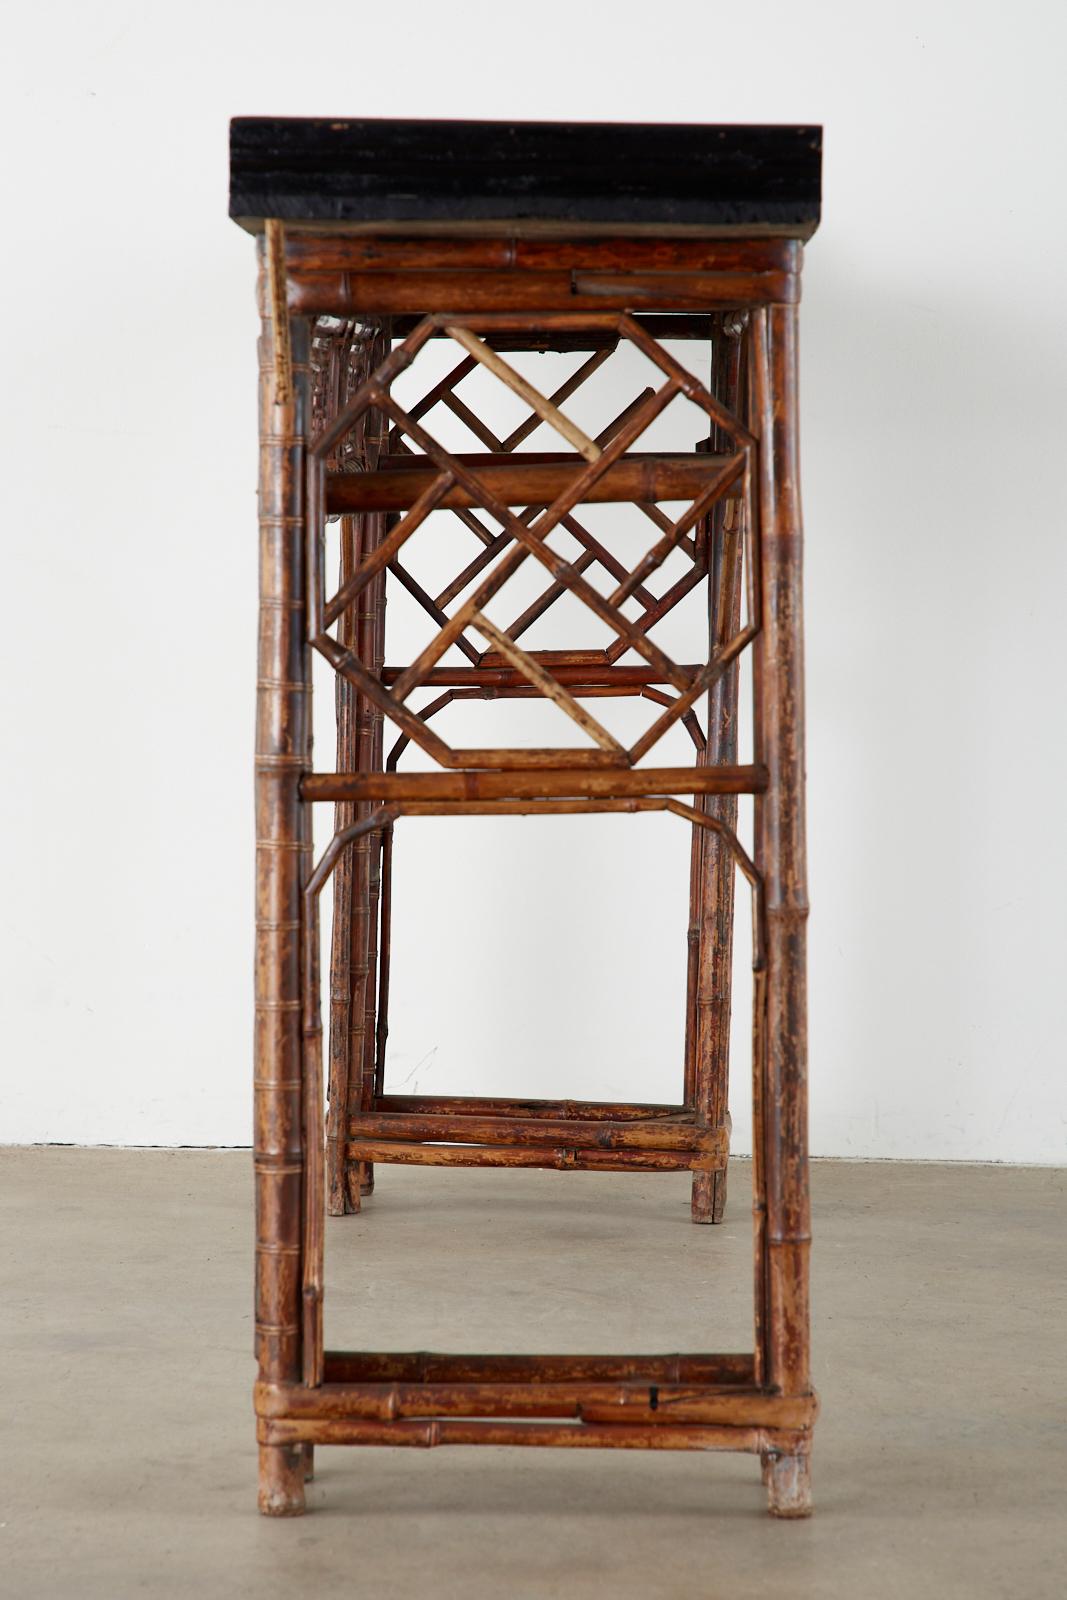 Late 19th century Chinese Qing Dynasty altar table or console. Constructed from tortoiseshell finish bamboo having a double pedestal topped with a lacquered elm top. The frame is intricately decorated with an open fretwork lattice design. The frieze